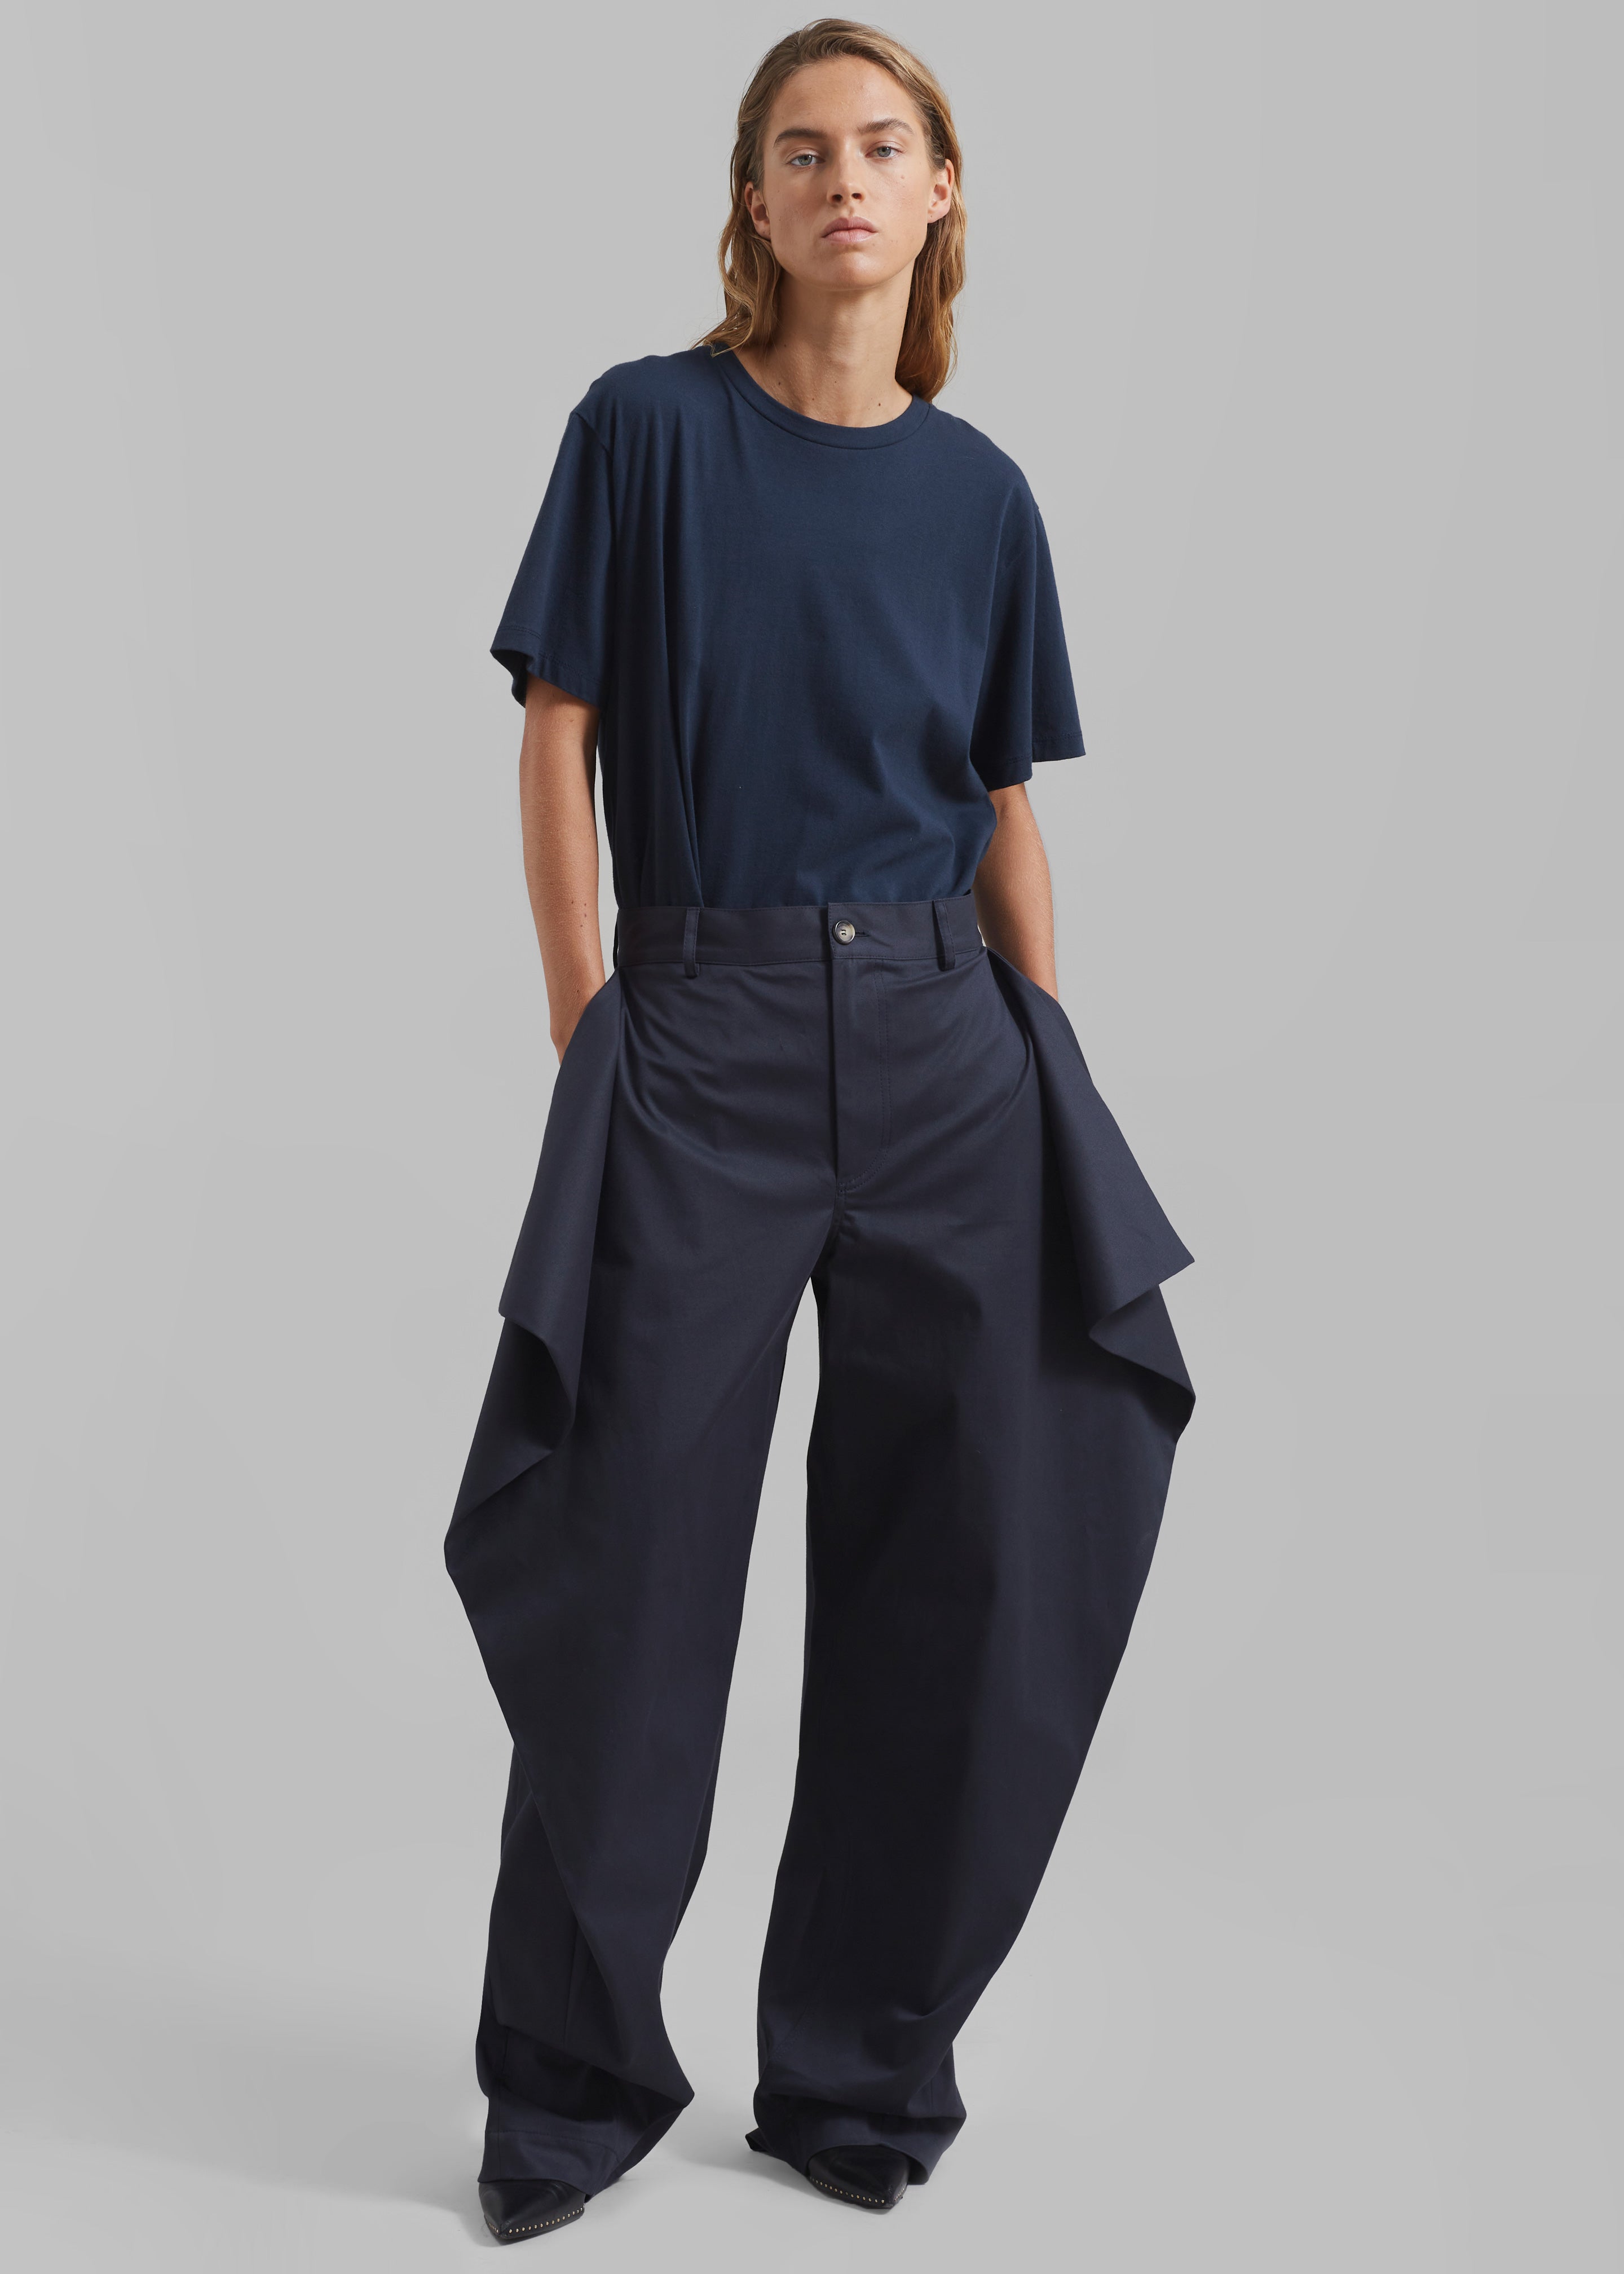 JW Anderson Kite Trousers - Navy - 1